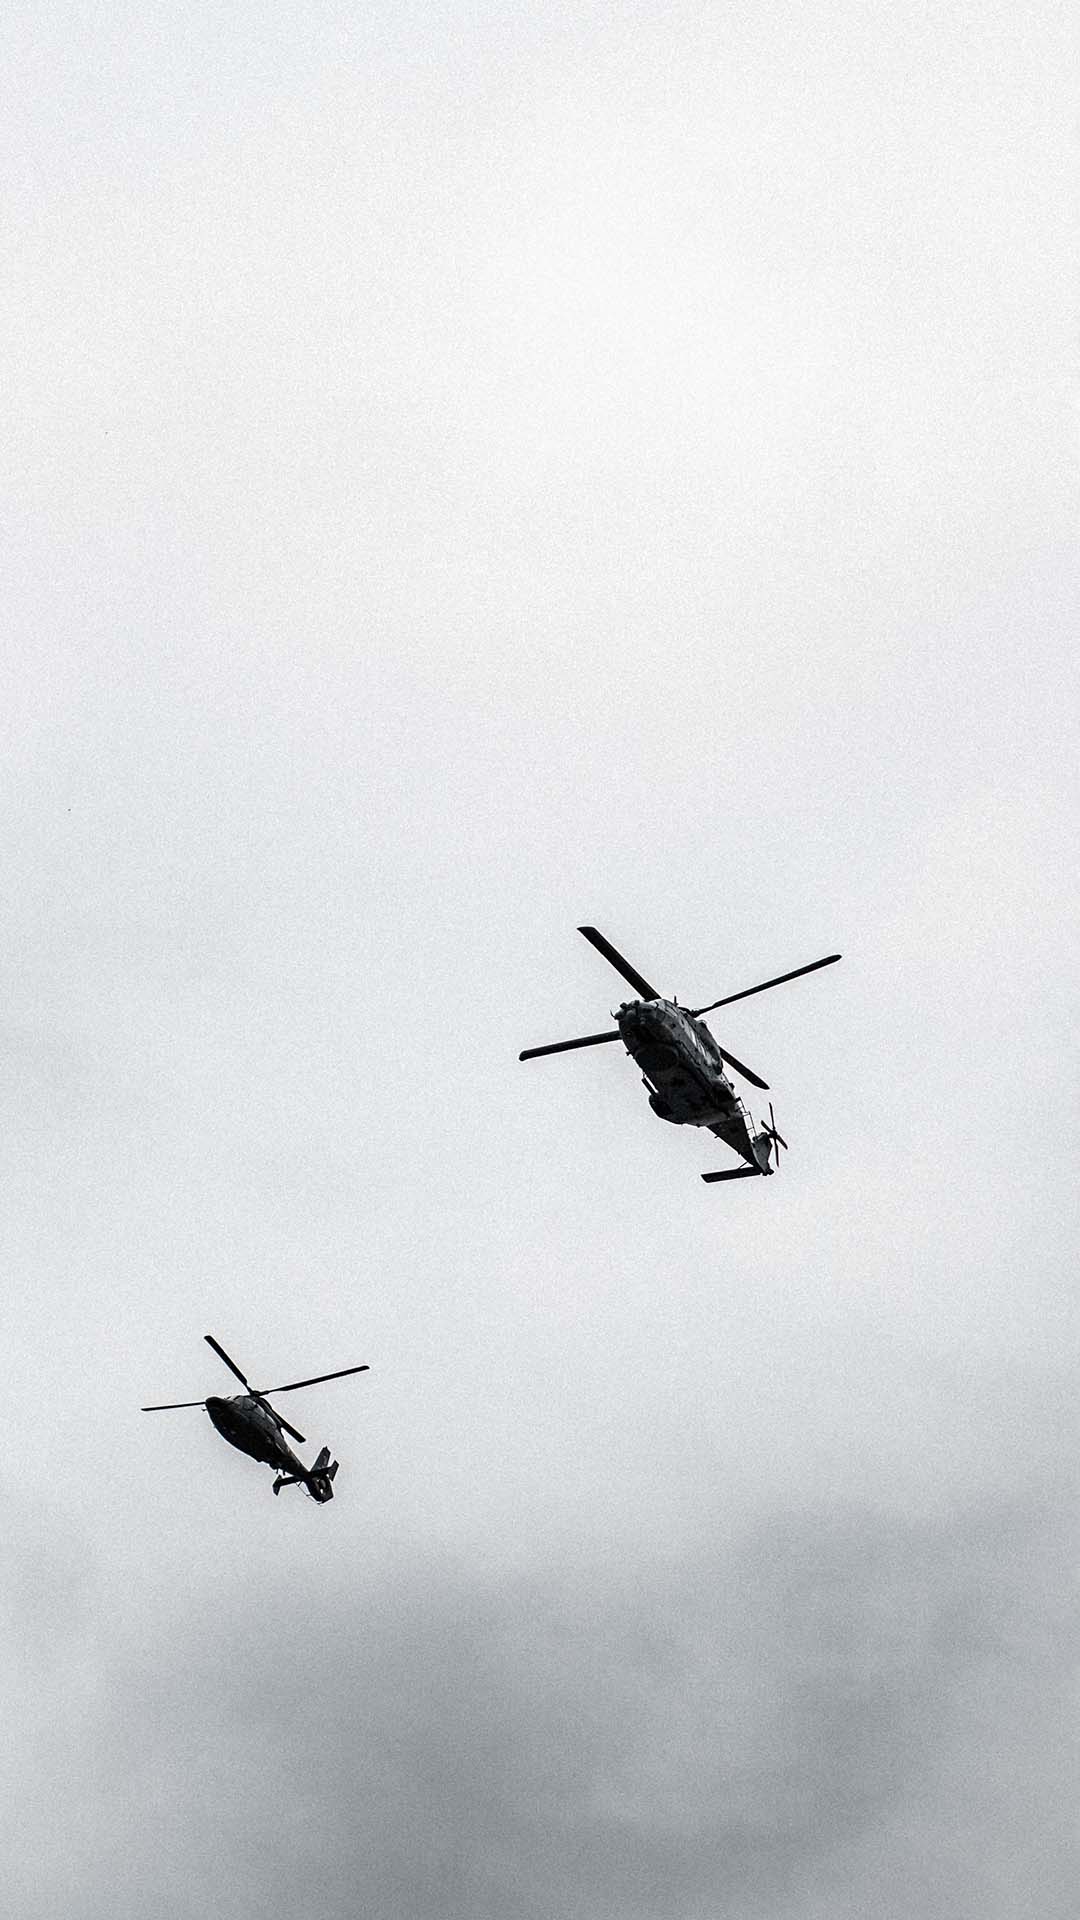 Military helicopters patrolling the airspace